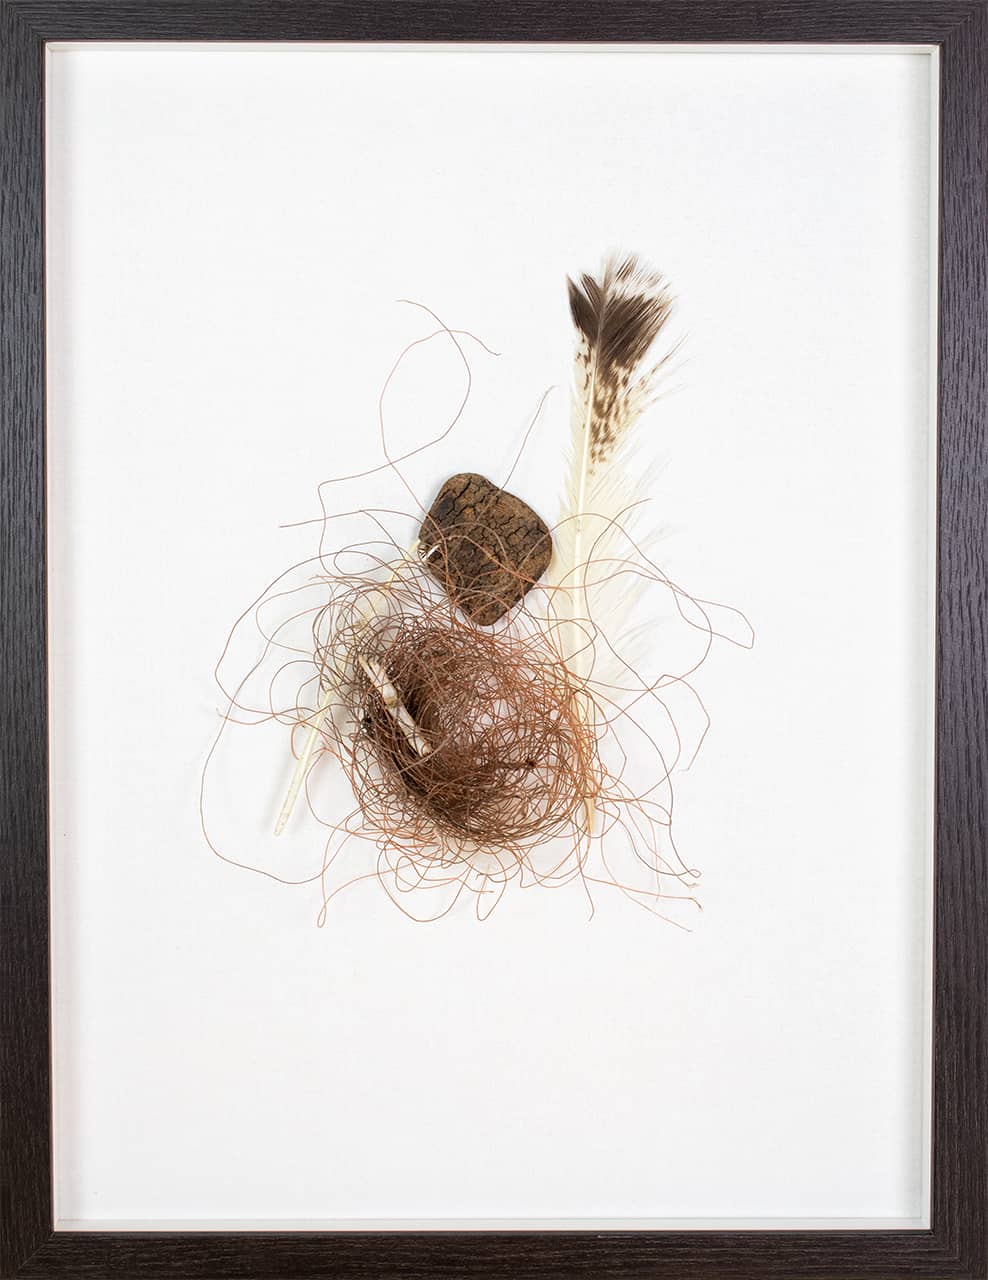 'Untitled' (from the beach), driftwood and feathers on canvas. Artwork by Francesca Virginia Coppola